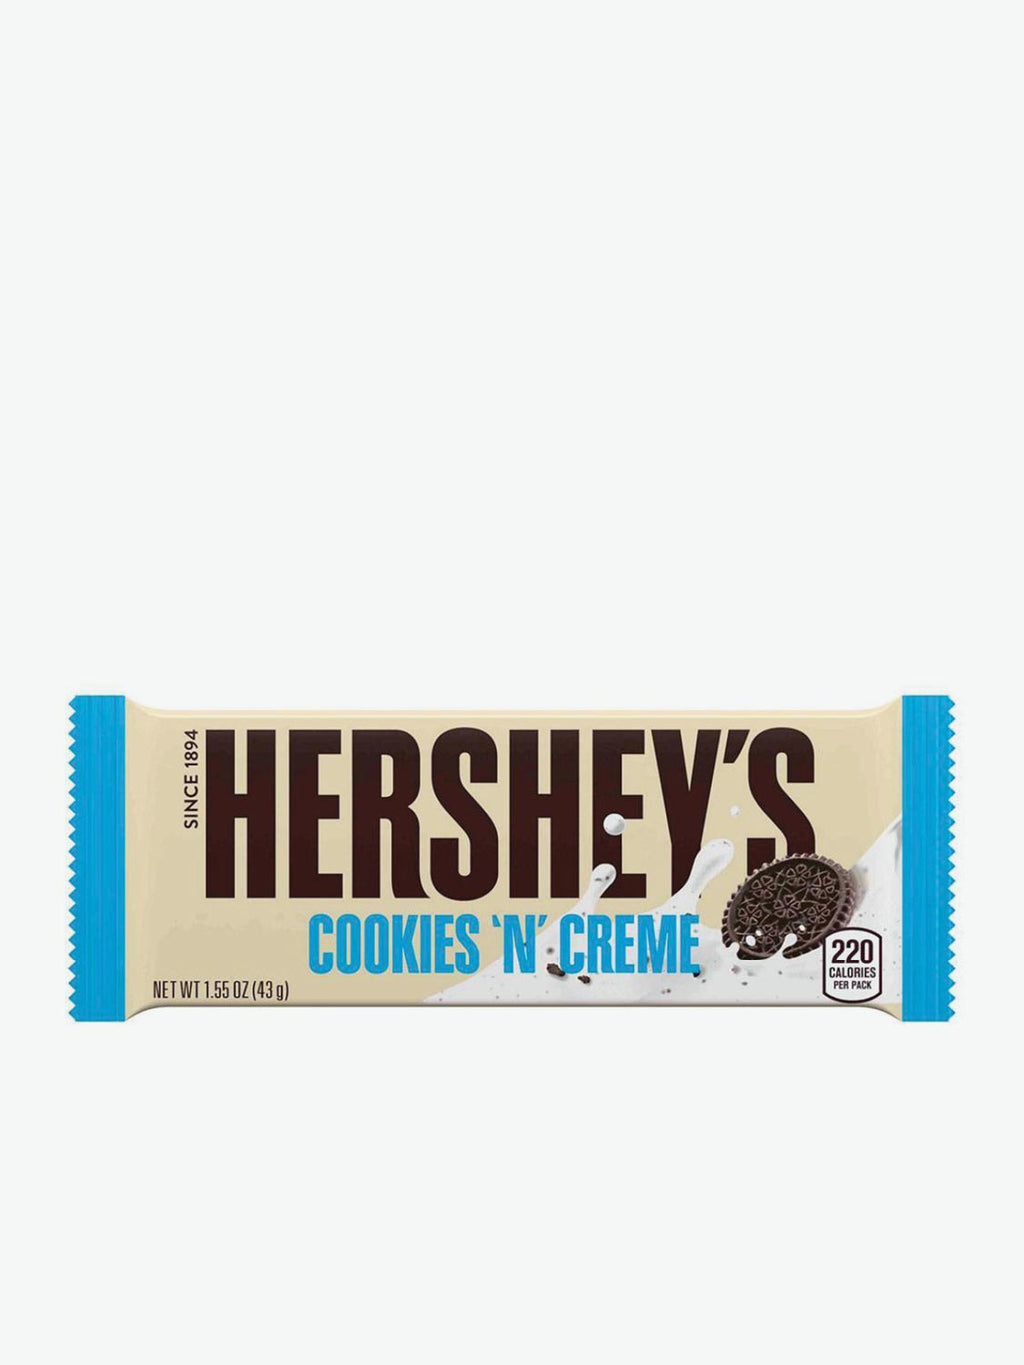 Hershey's Cookies and Creme Bar | A